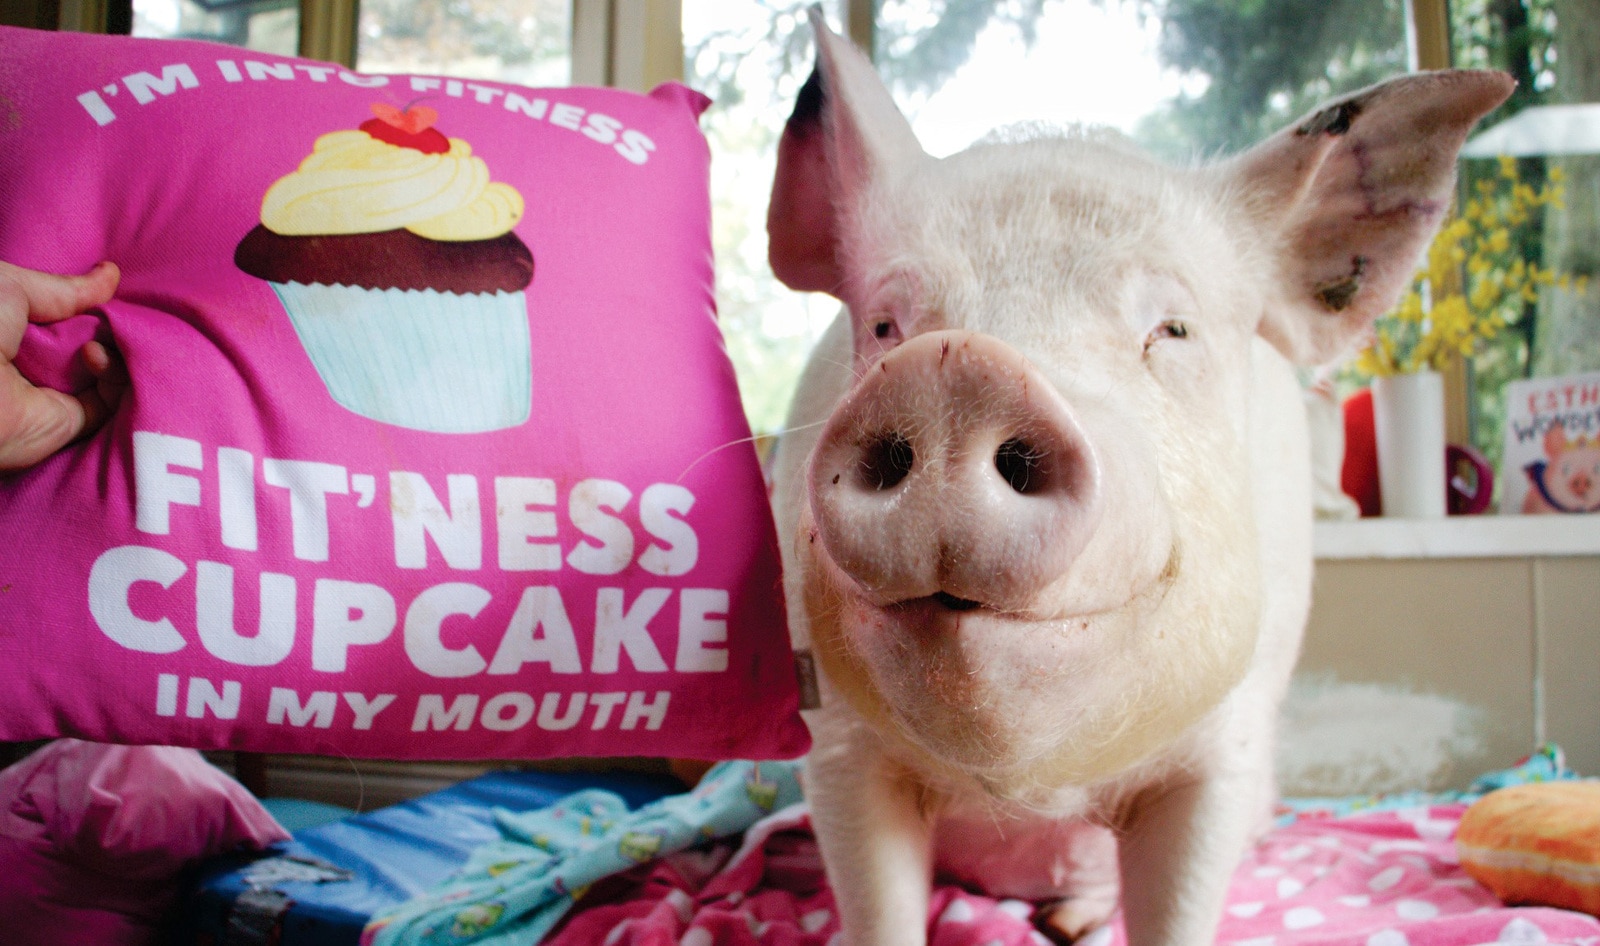 Country Crock and Esther the Wonder Pig Launch Vegan Cupcakes